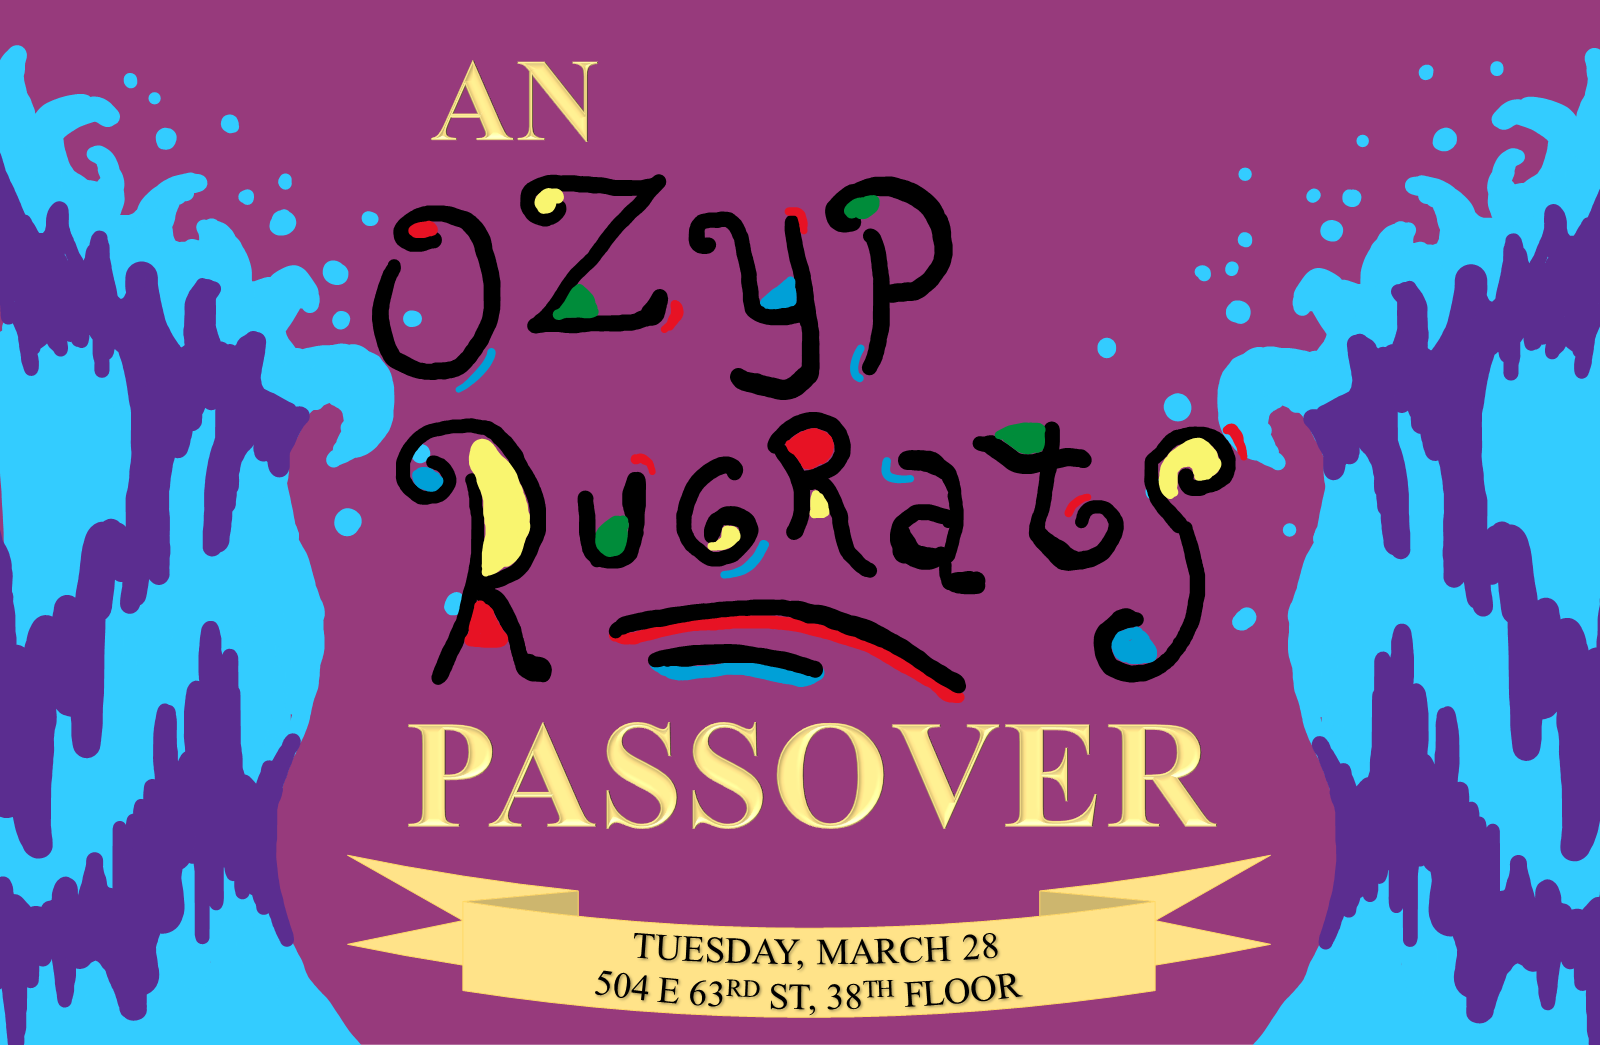 OZYP Rugrats Passover